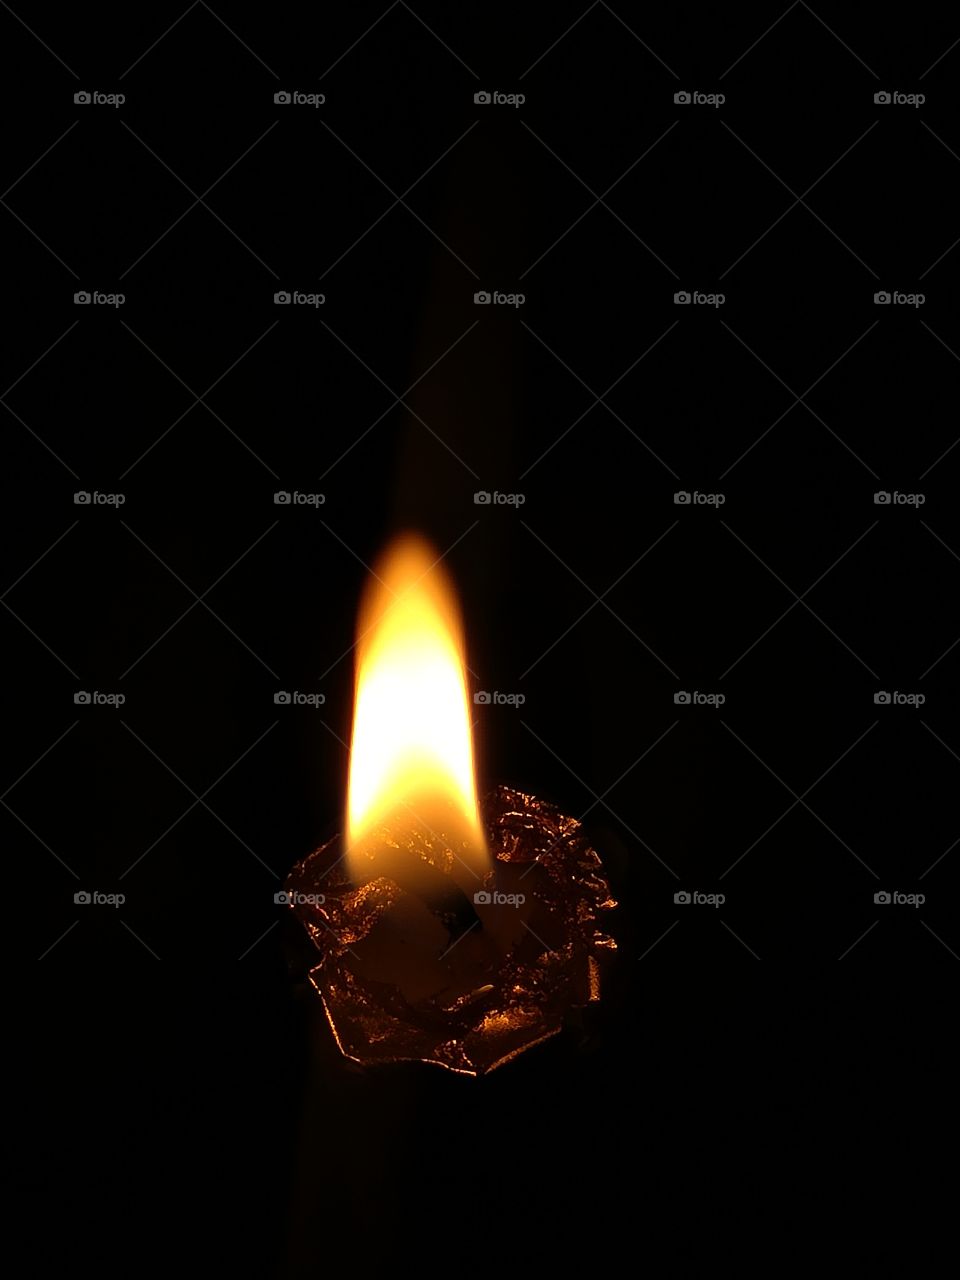 flame#candle#light#darkness#fire